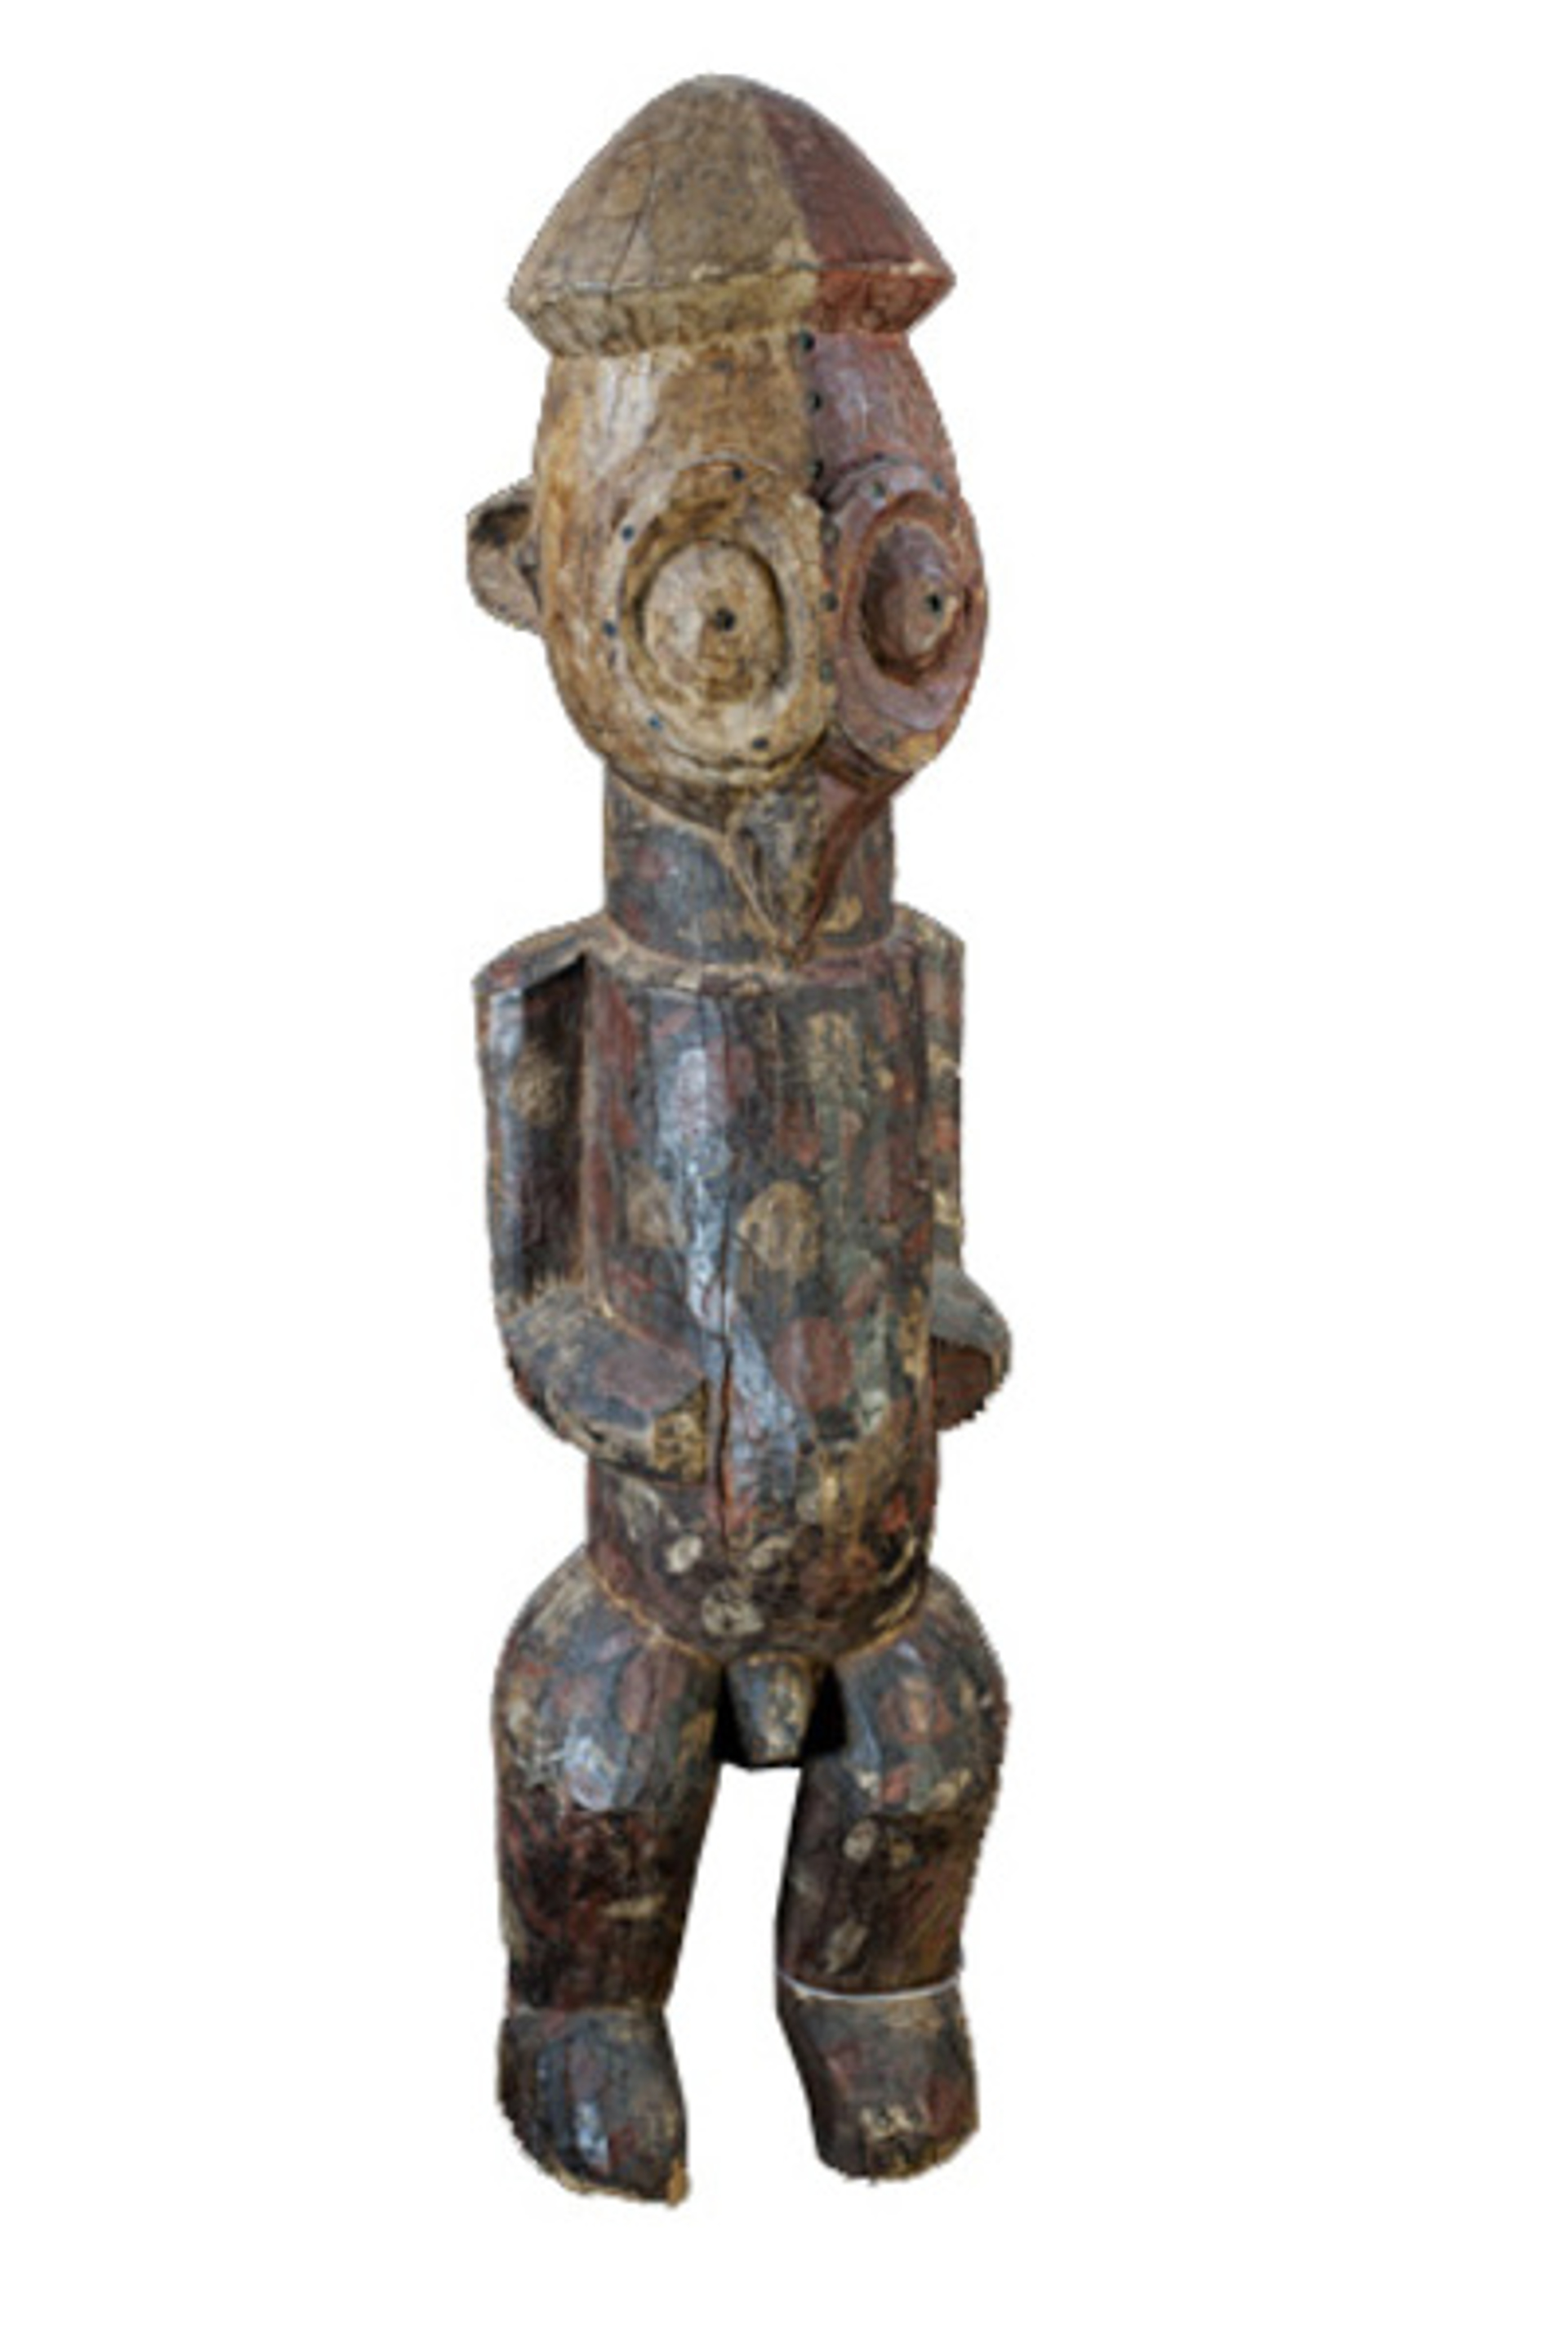 Yaka Statue-Congo (Used for planting, harvesting ceremony) by African